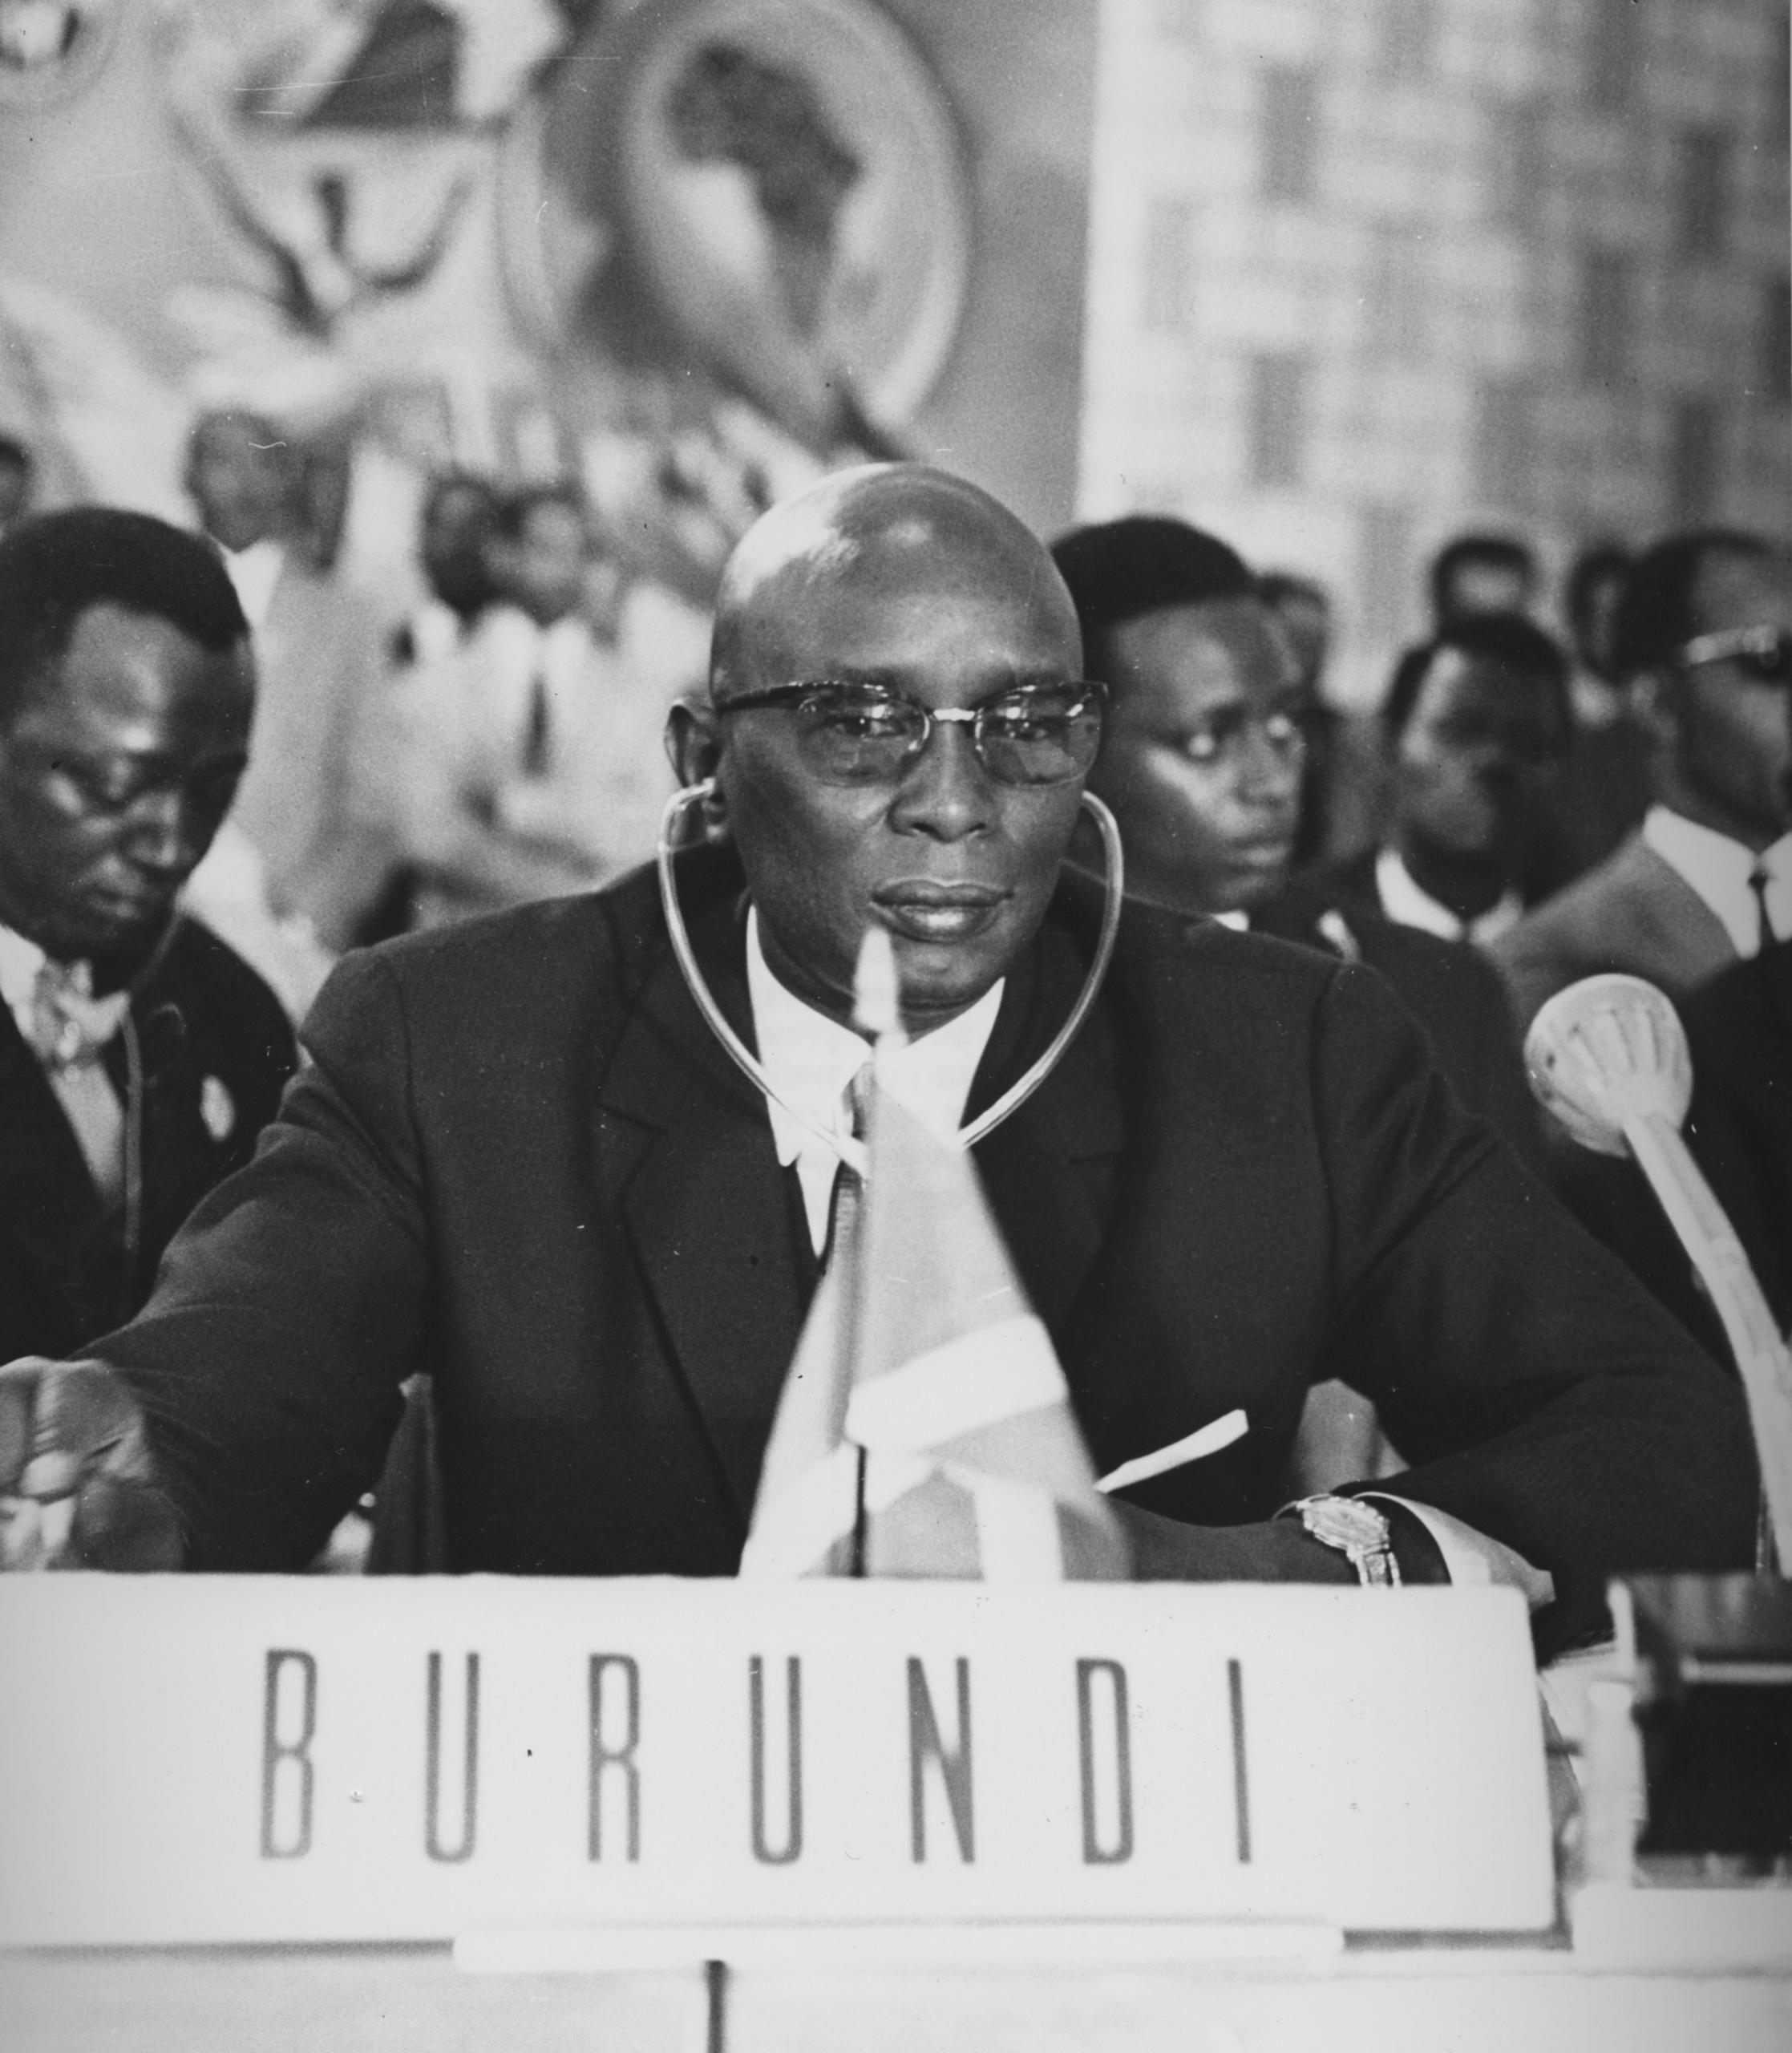 Mwambutsa IV Bangiriceng of Burundi at a conference of African heads of state in Addis Ababa, Ethiopia in 1963